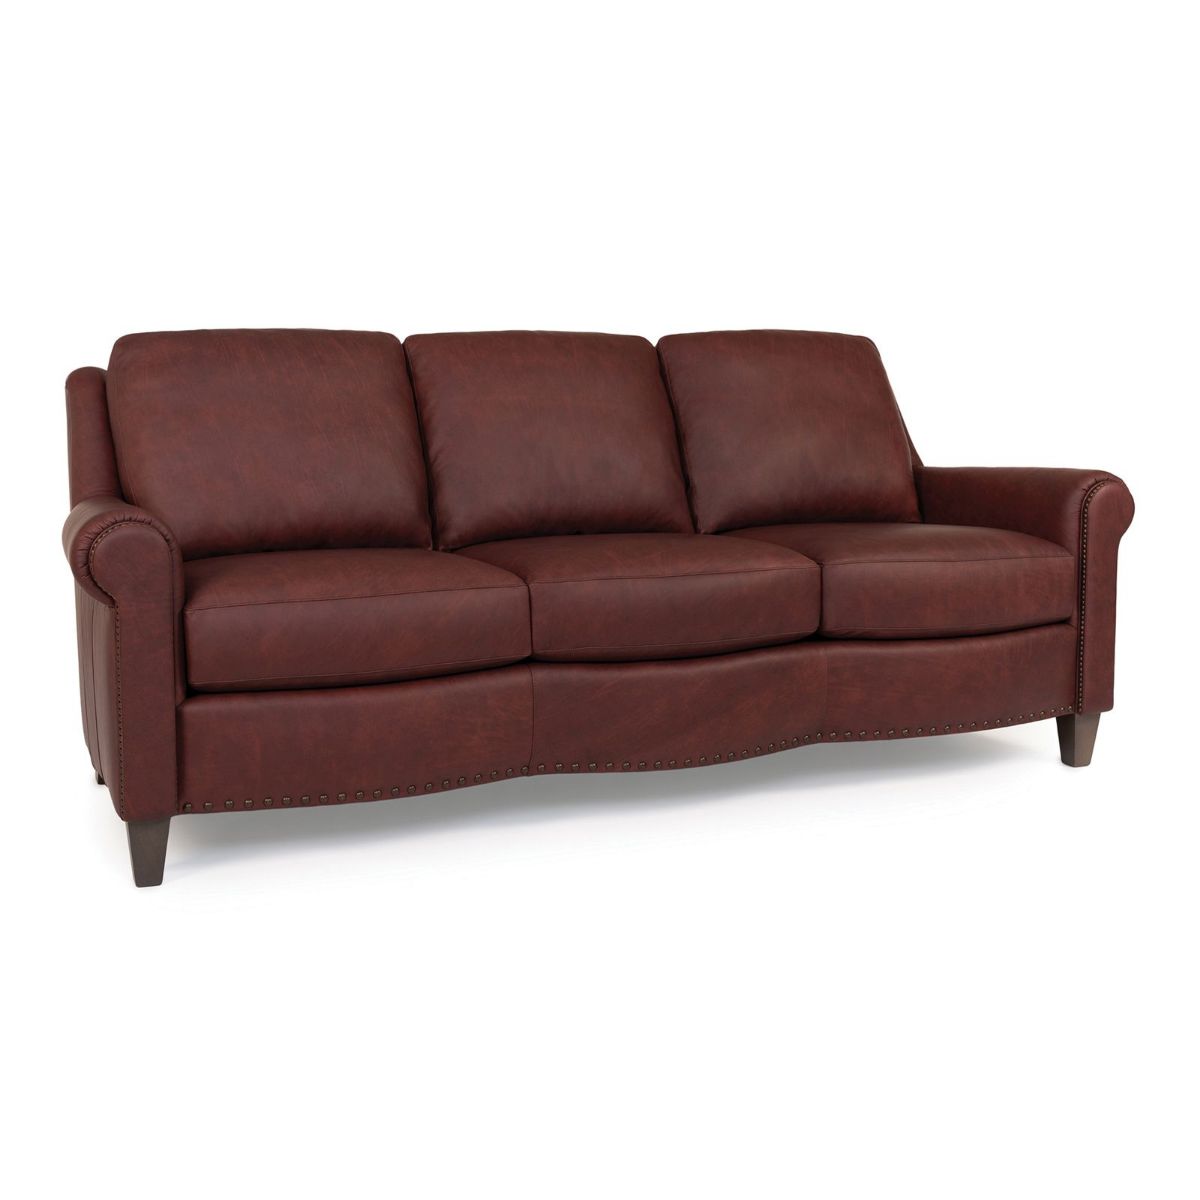 Picture of Burgundy Leather Sofa #268